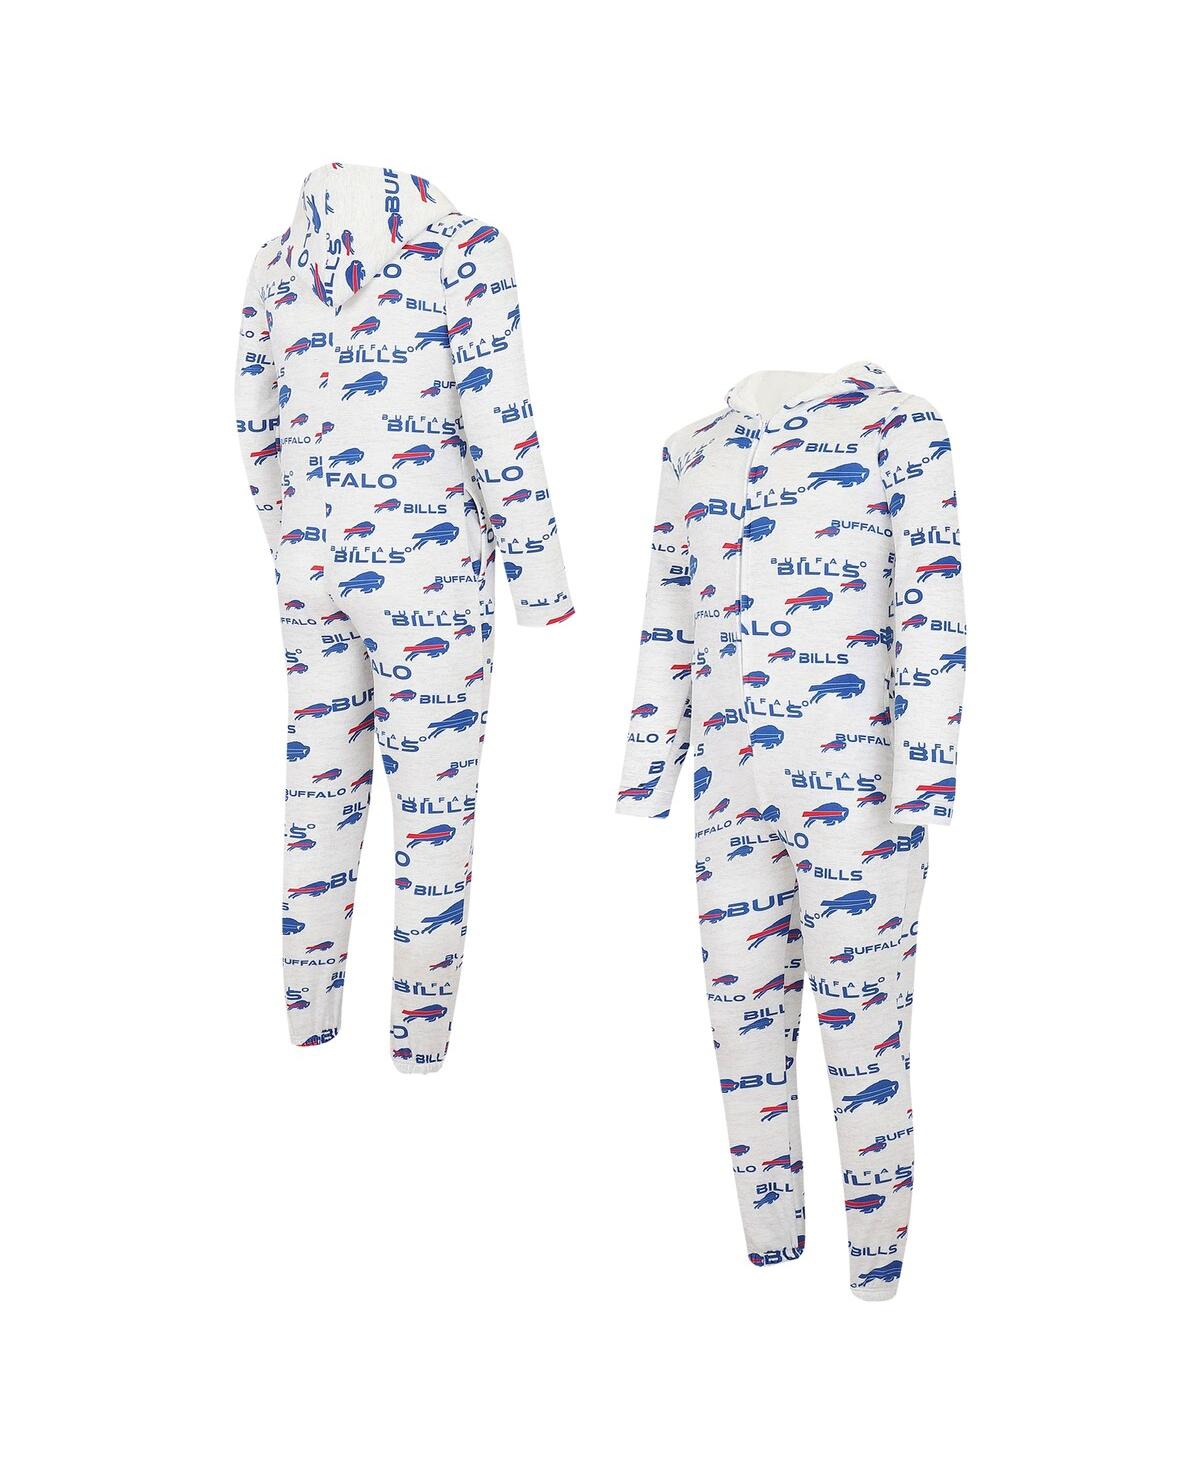 CONCEPTS SPORT MEN'S CONCEPTS SPORT WHITE BUFFALO BILLS ALLOVER PRINT DOCKET UNION FULL-ZIP HOODED PAJAMA SUIT